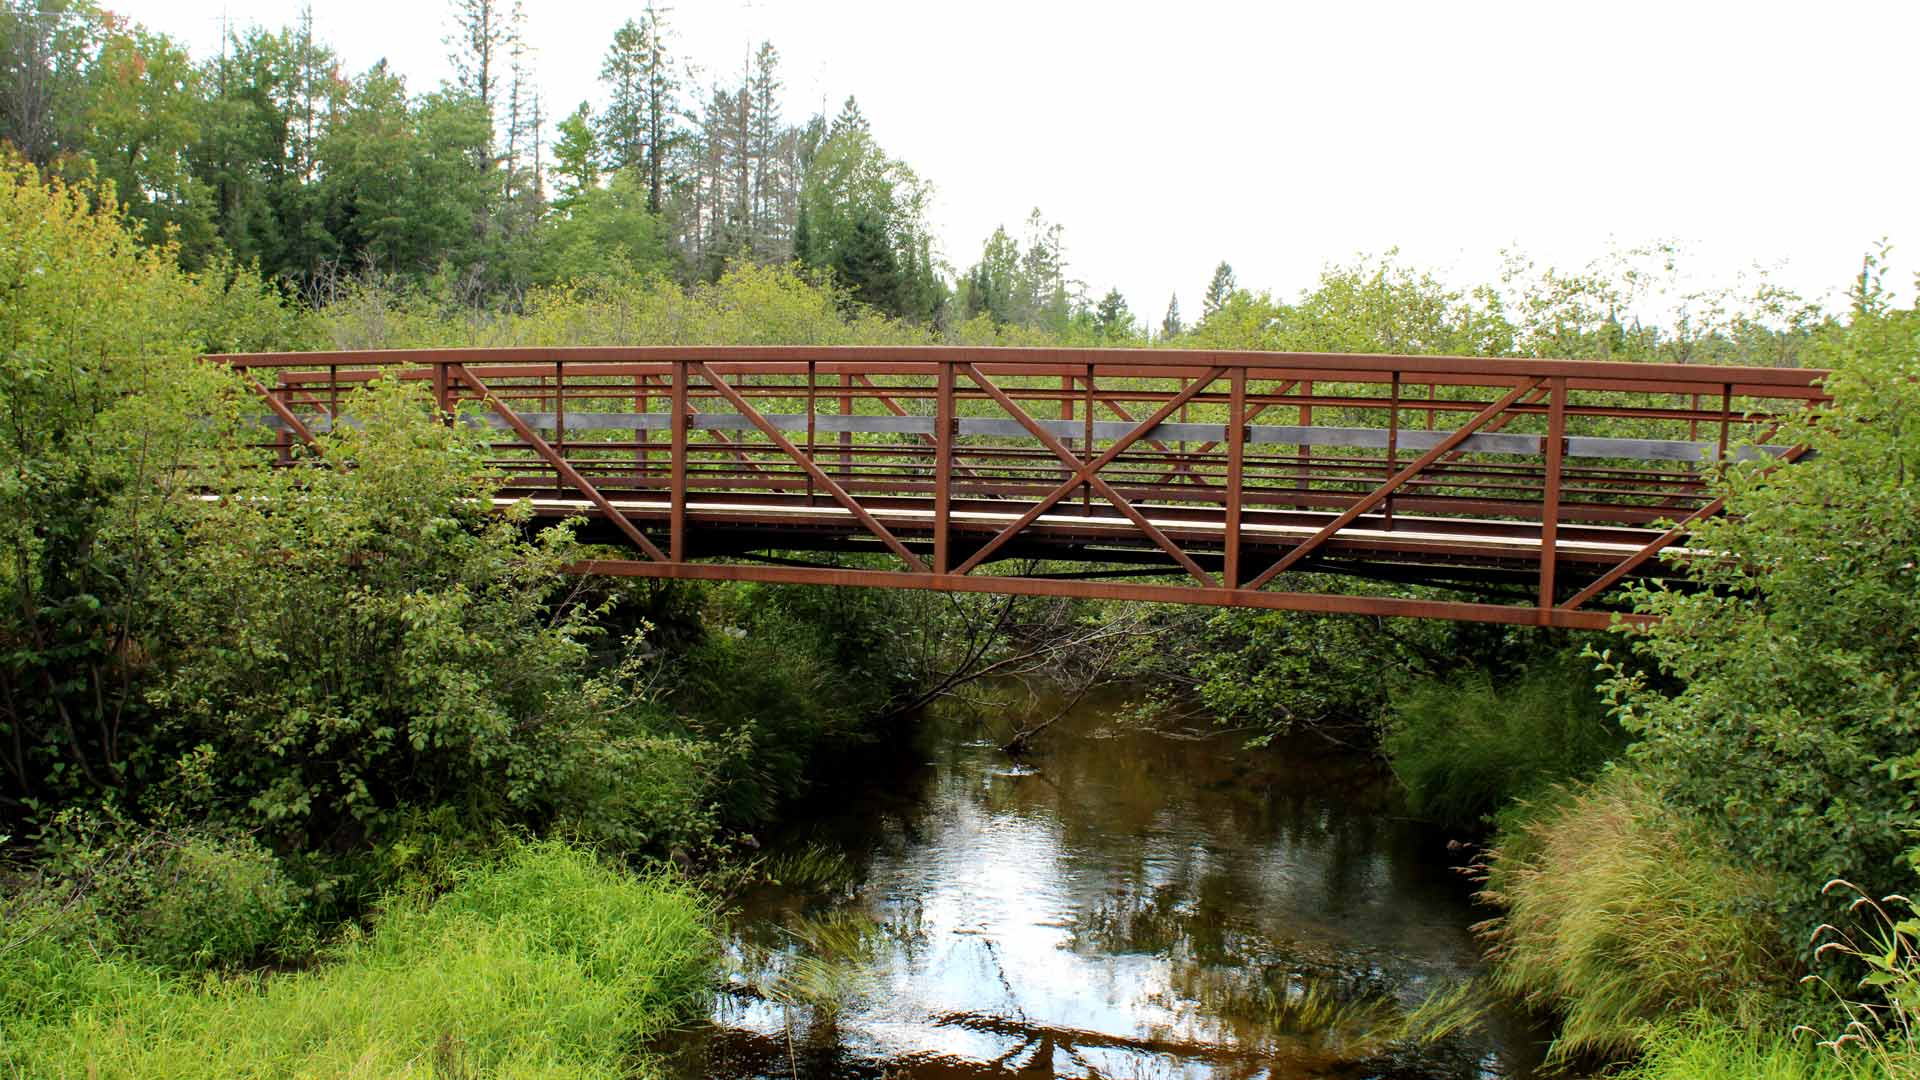 Bridge over a river of Conover-Phelps Trail in Vilas County, Wisconsin